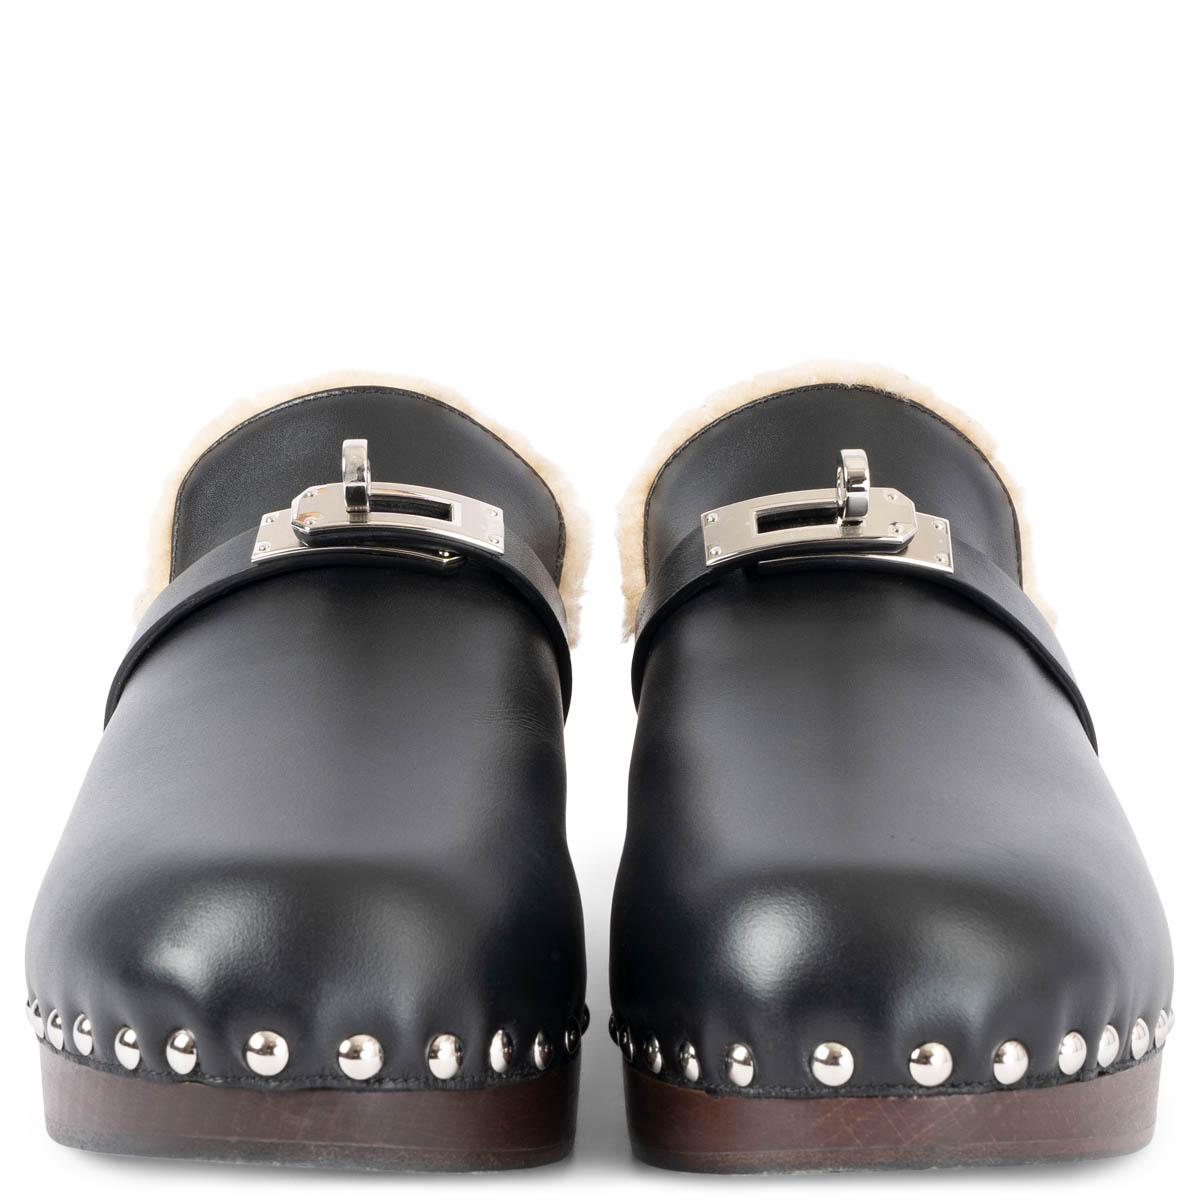 100% authentic Hermès Carlotta clog mules in black calfskin and shearling with beechwood sole and iconic palladium-plated Kelly buckle. A modern take on a boho chic style. Have been worn once inside and are in virtually new condition. Come with dust